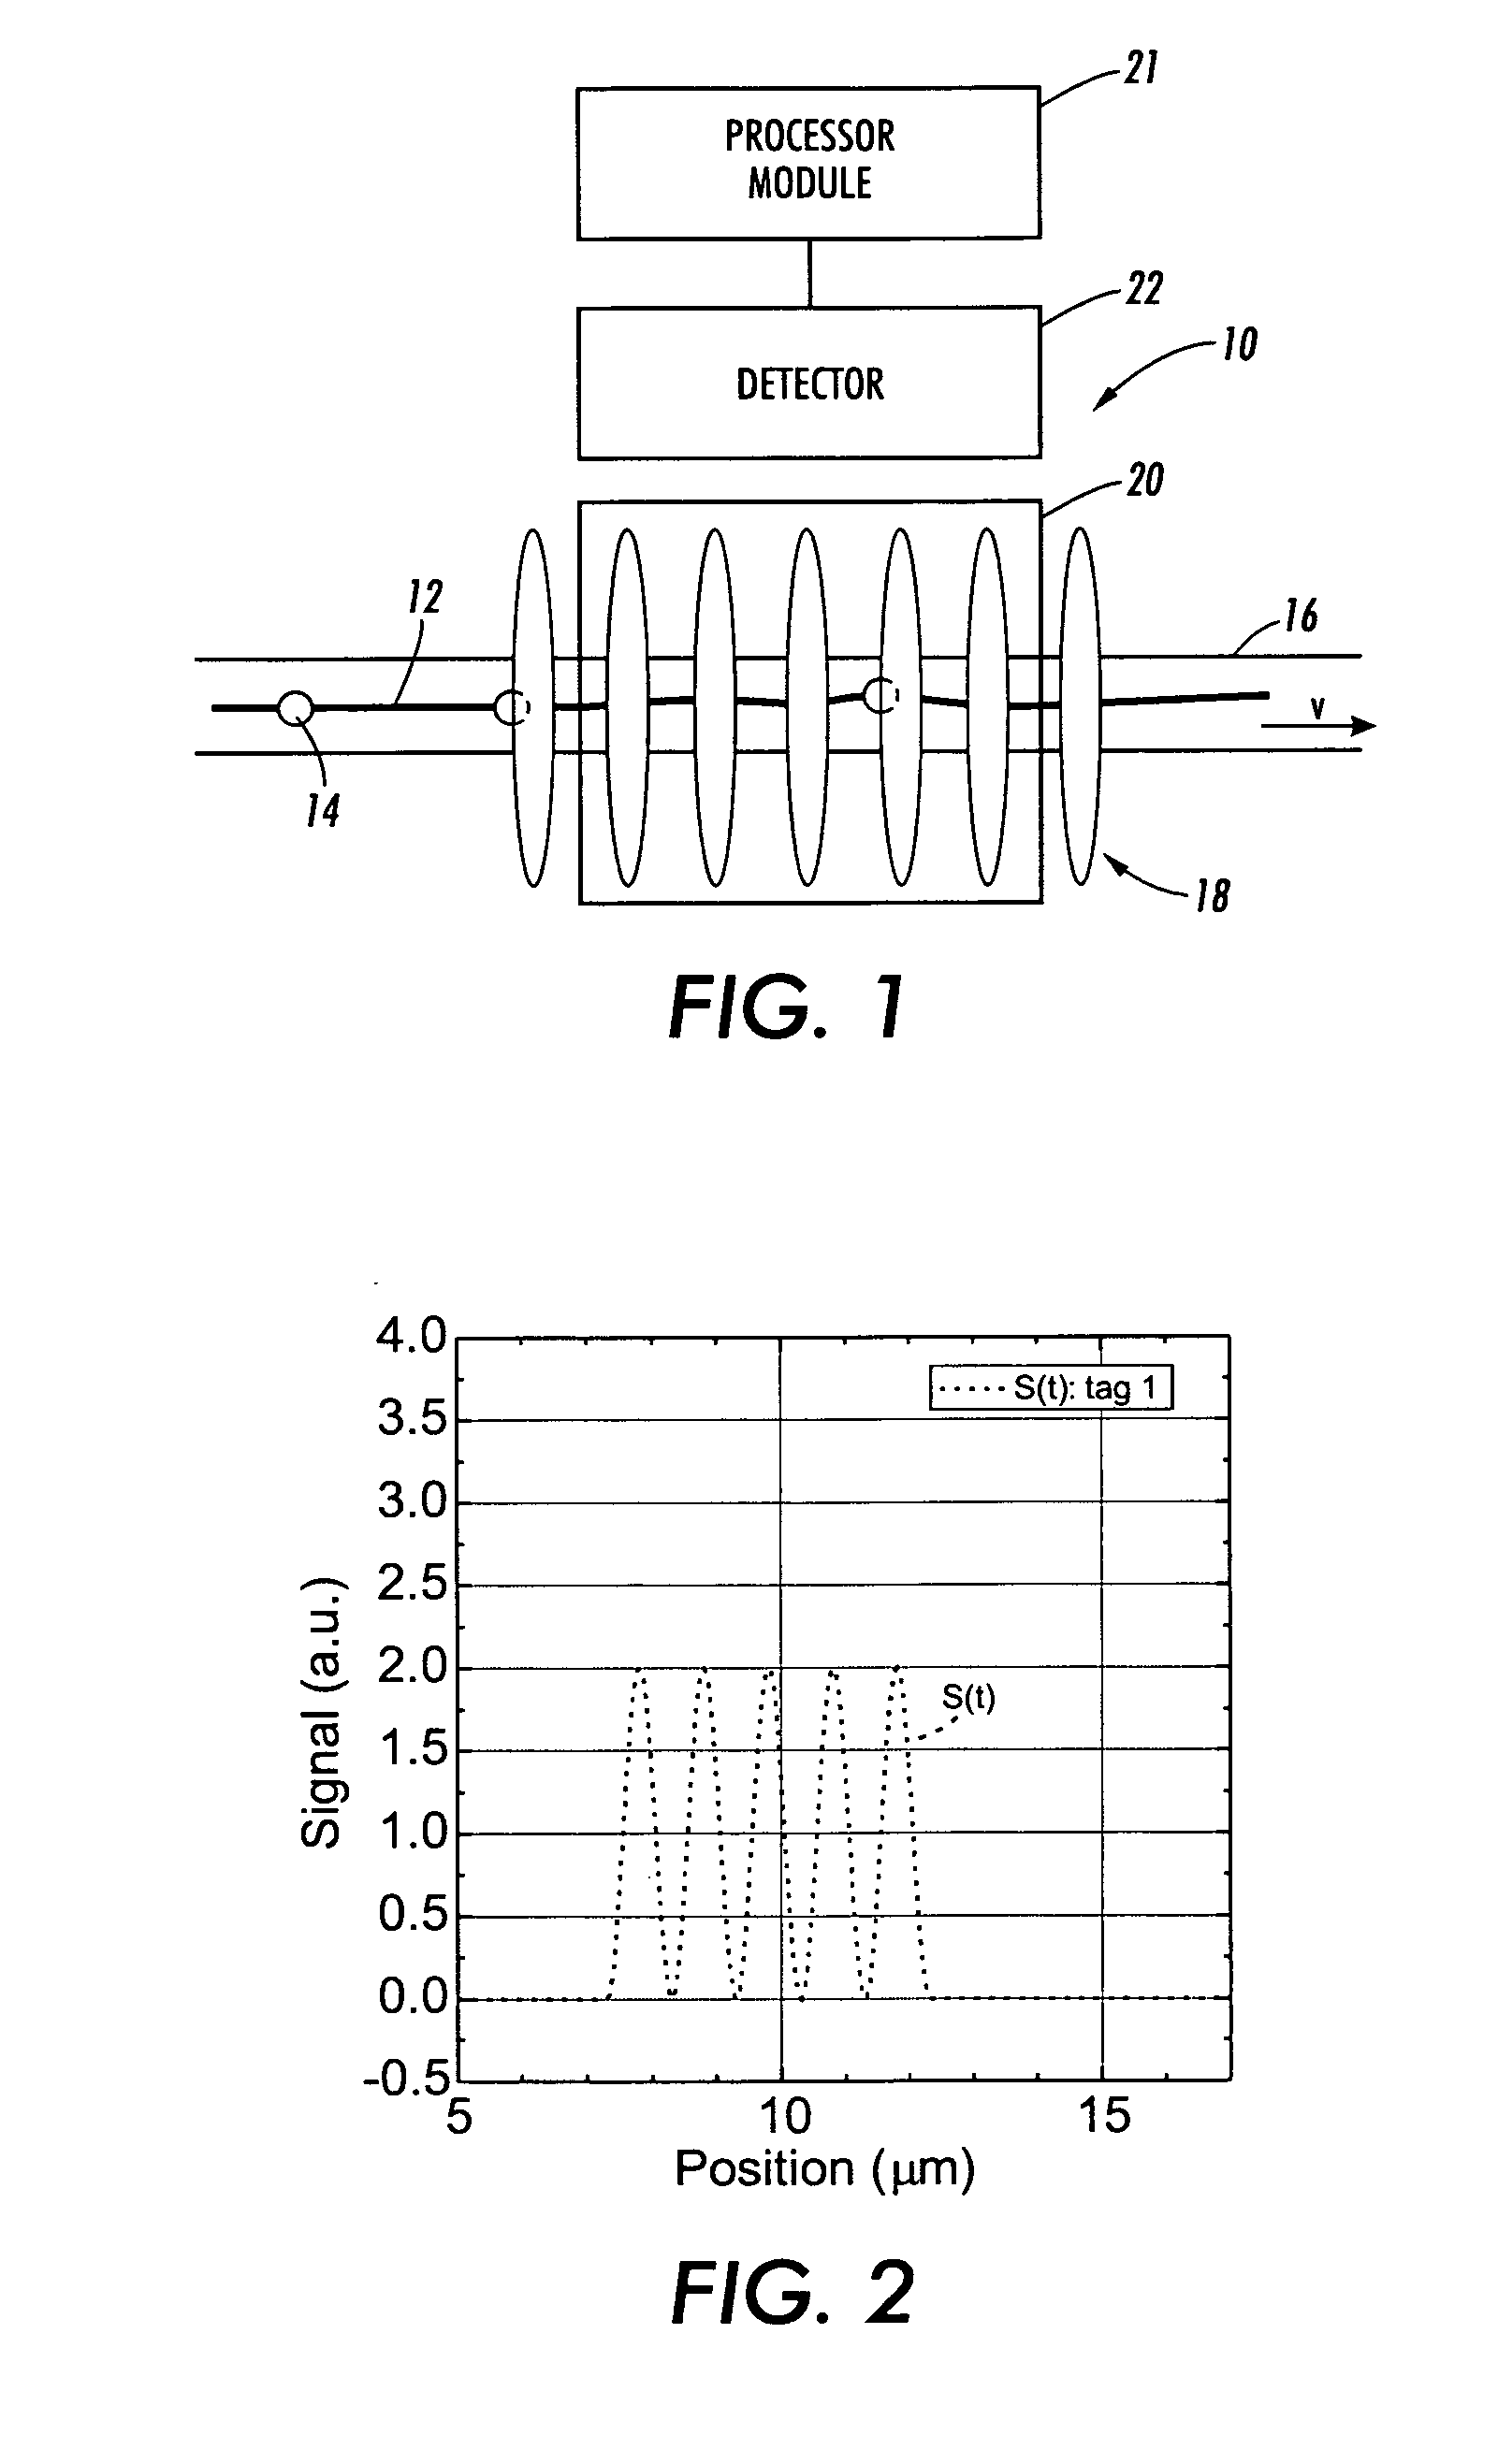 Method and system for evaluation of signals received from spatially modulated excitation and emission to accurately determine particle positions and distances